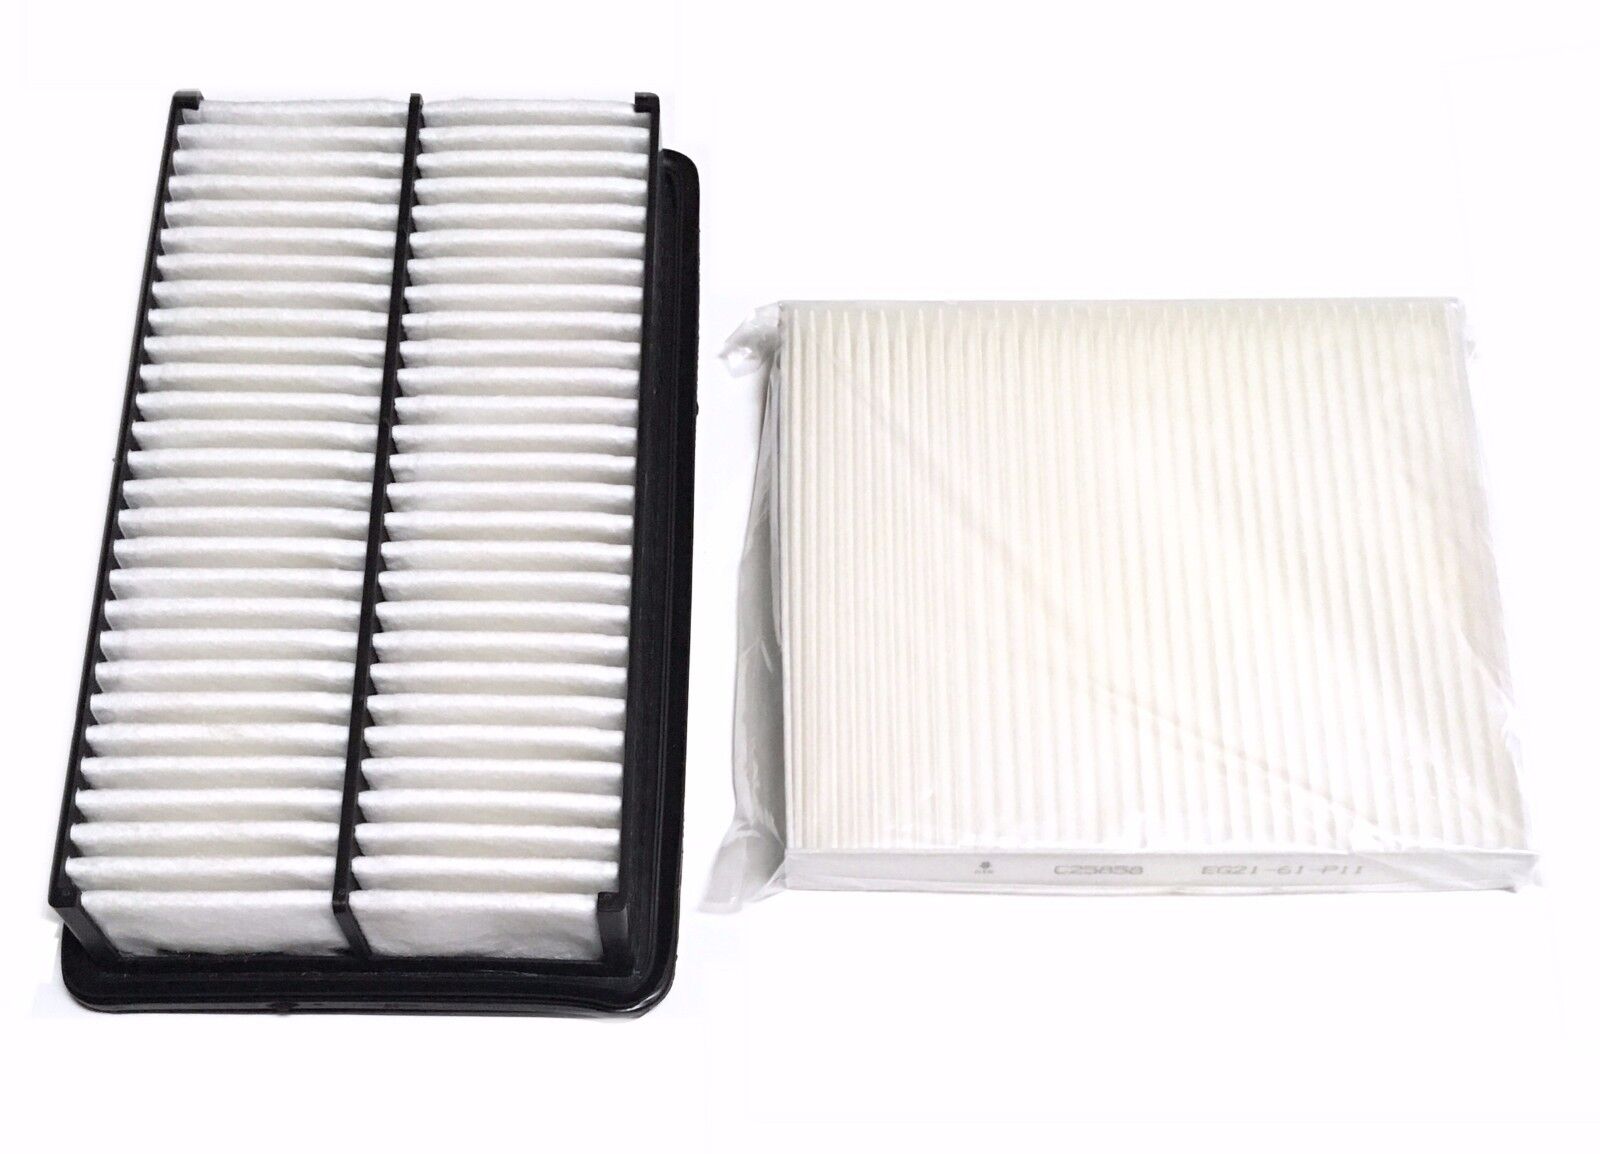 AF5525 C25858 Engine&Cabin Air Filter For CX-7 Mazdaspeed Mazda6 turbo only